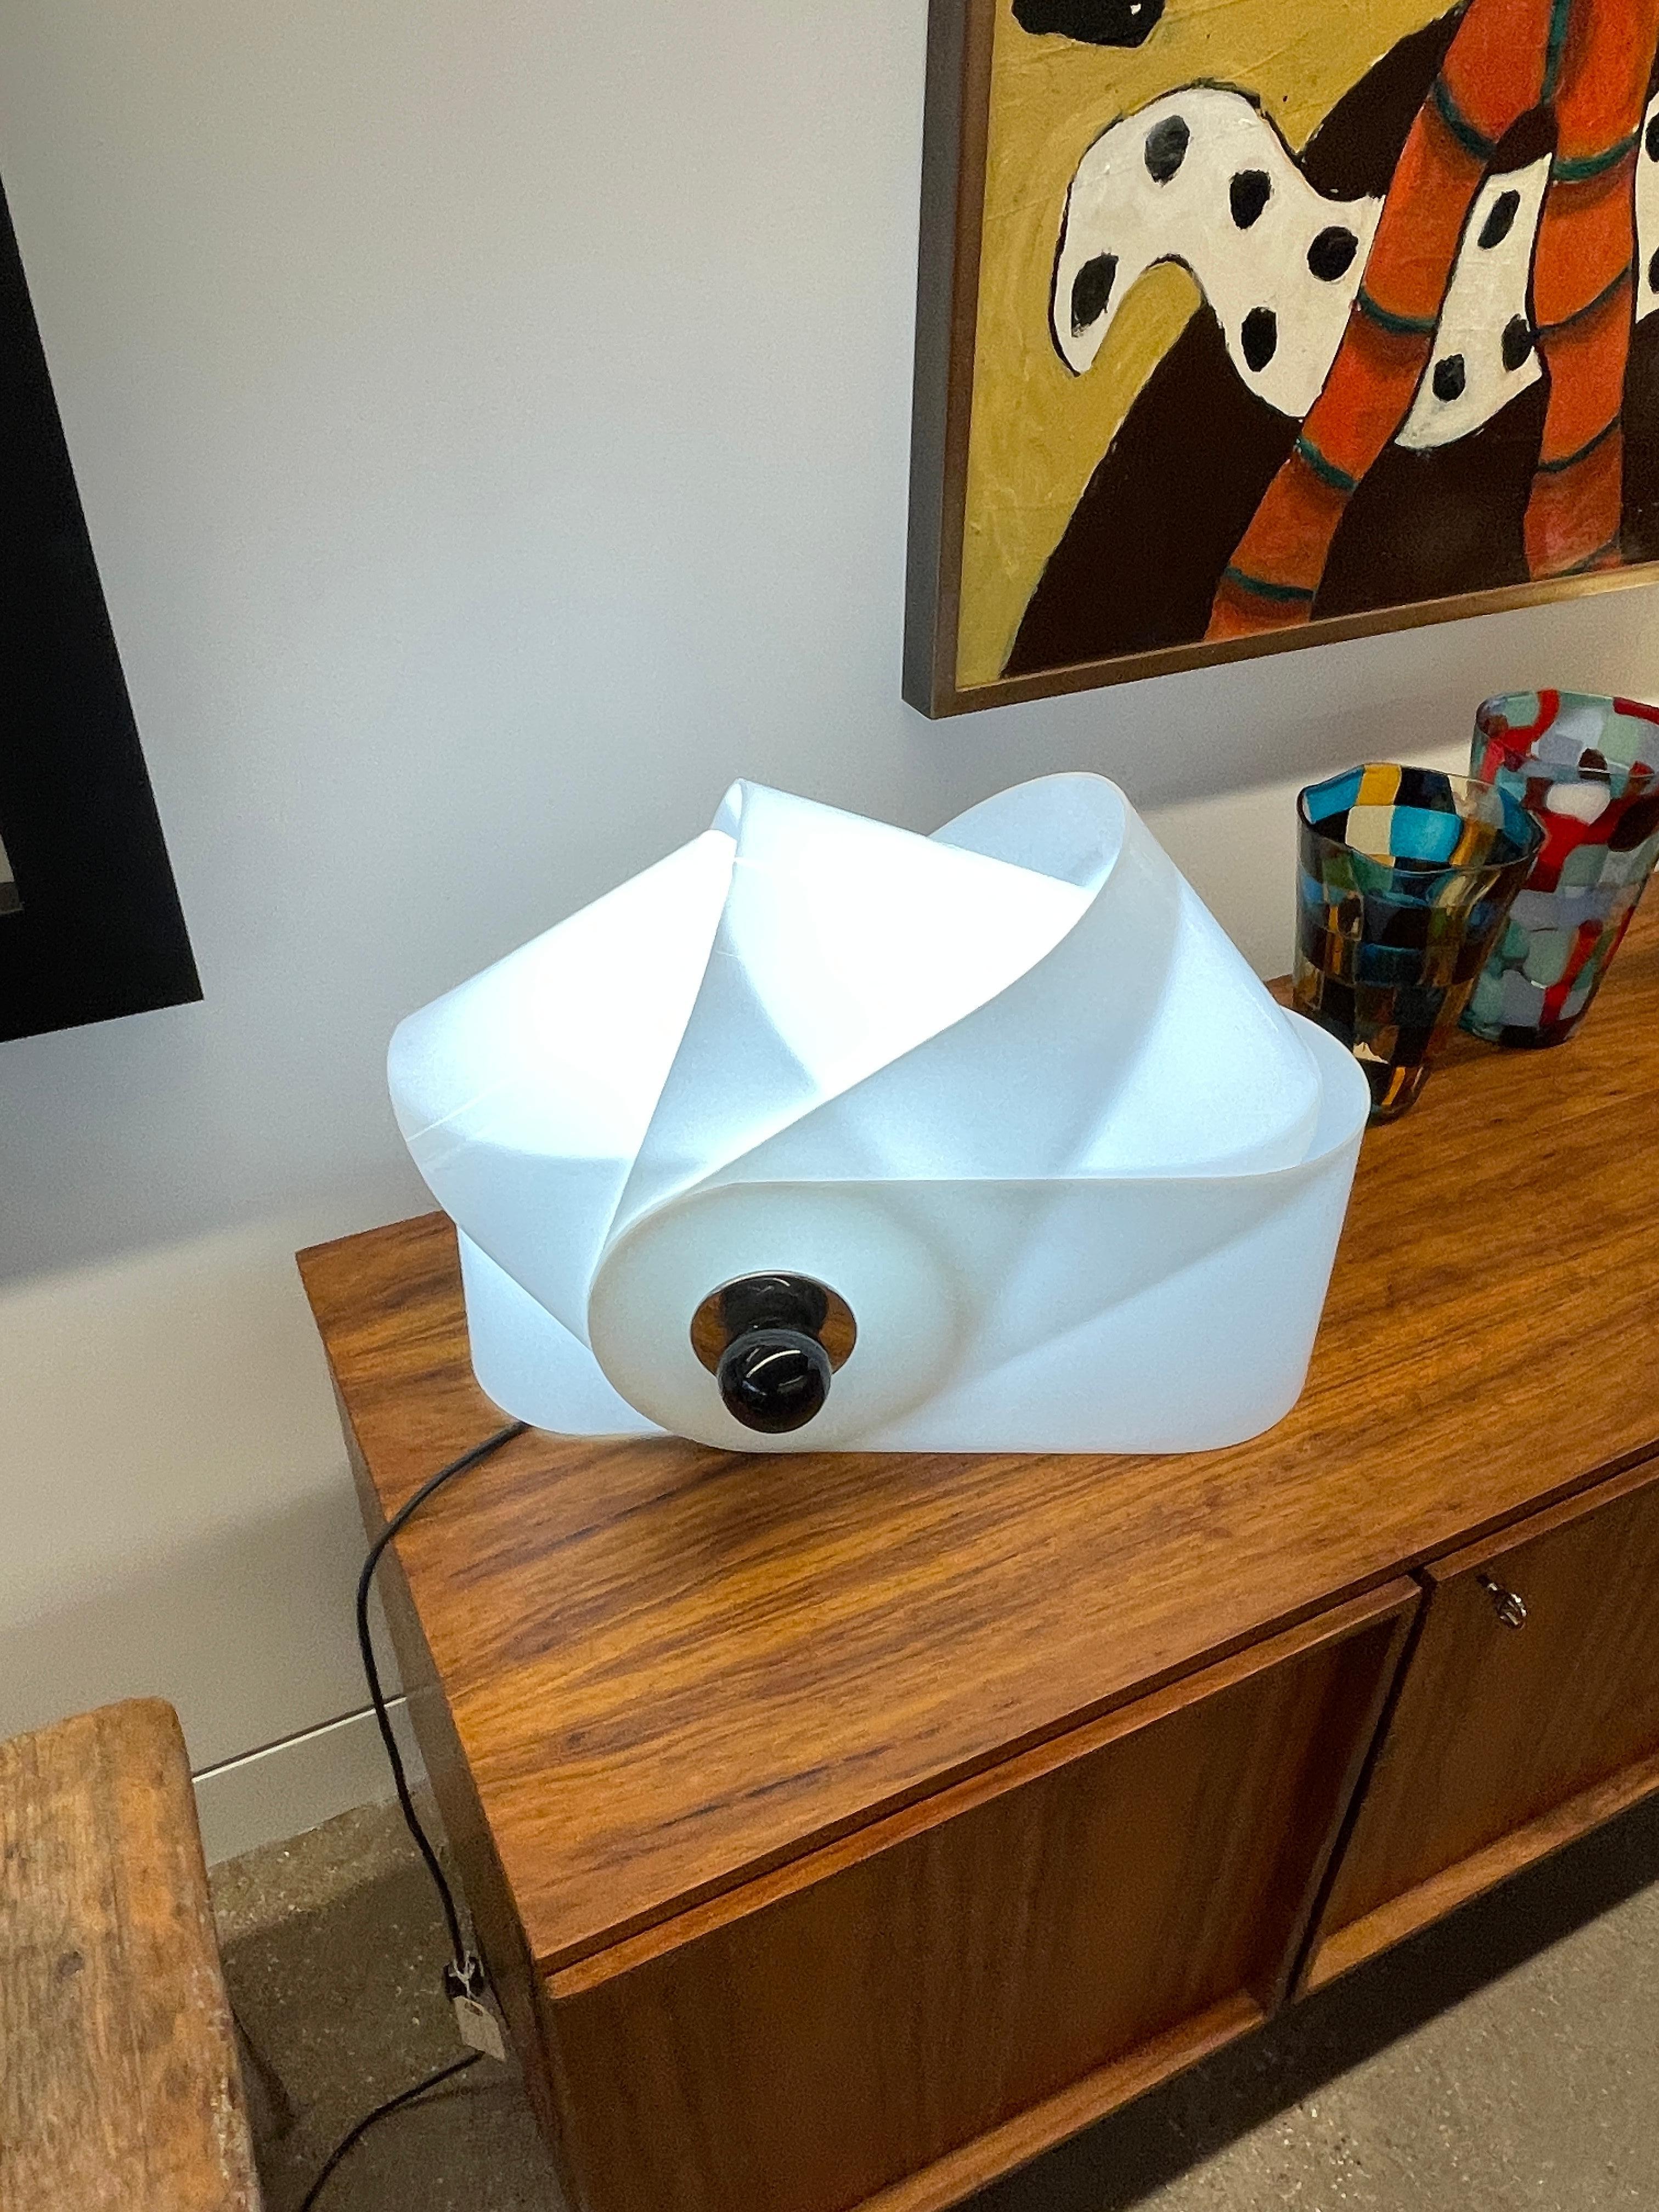 Early Production White Model “Gherpe” Table Lamp by Superstudio for Poltronova In Excellent Condition For Sale In Skokie, IL